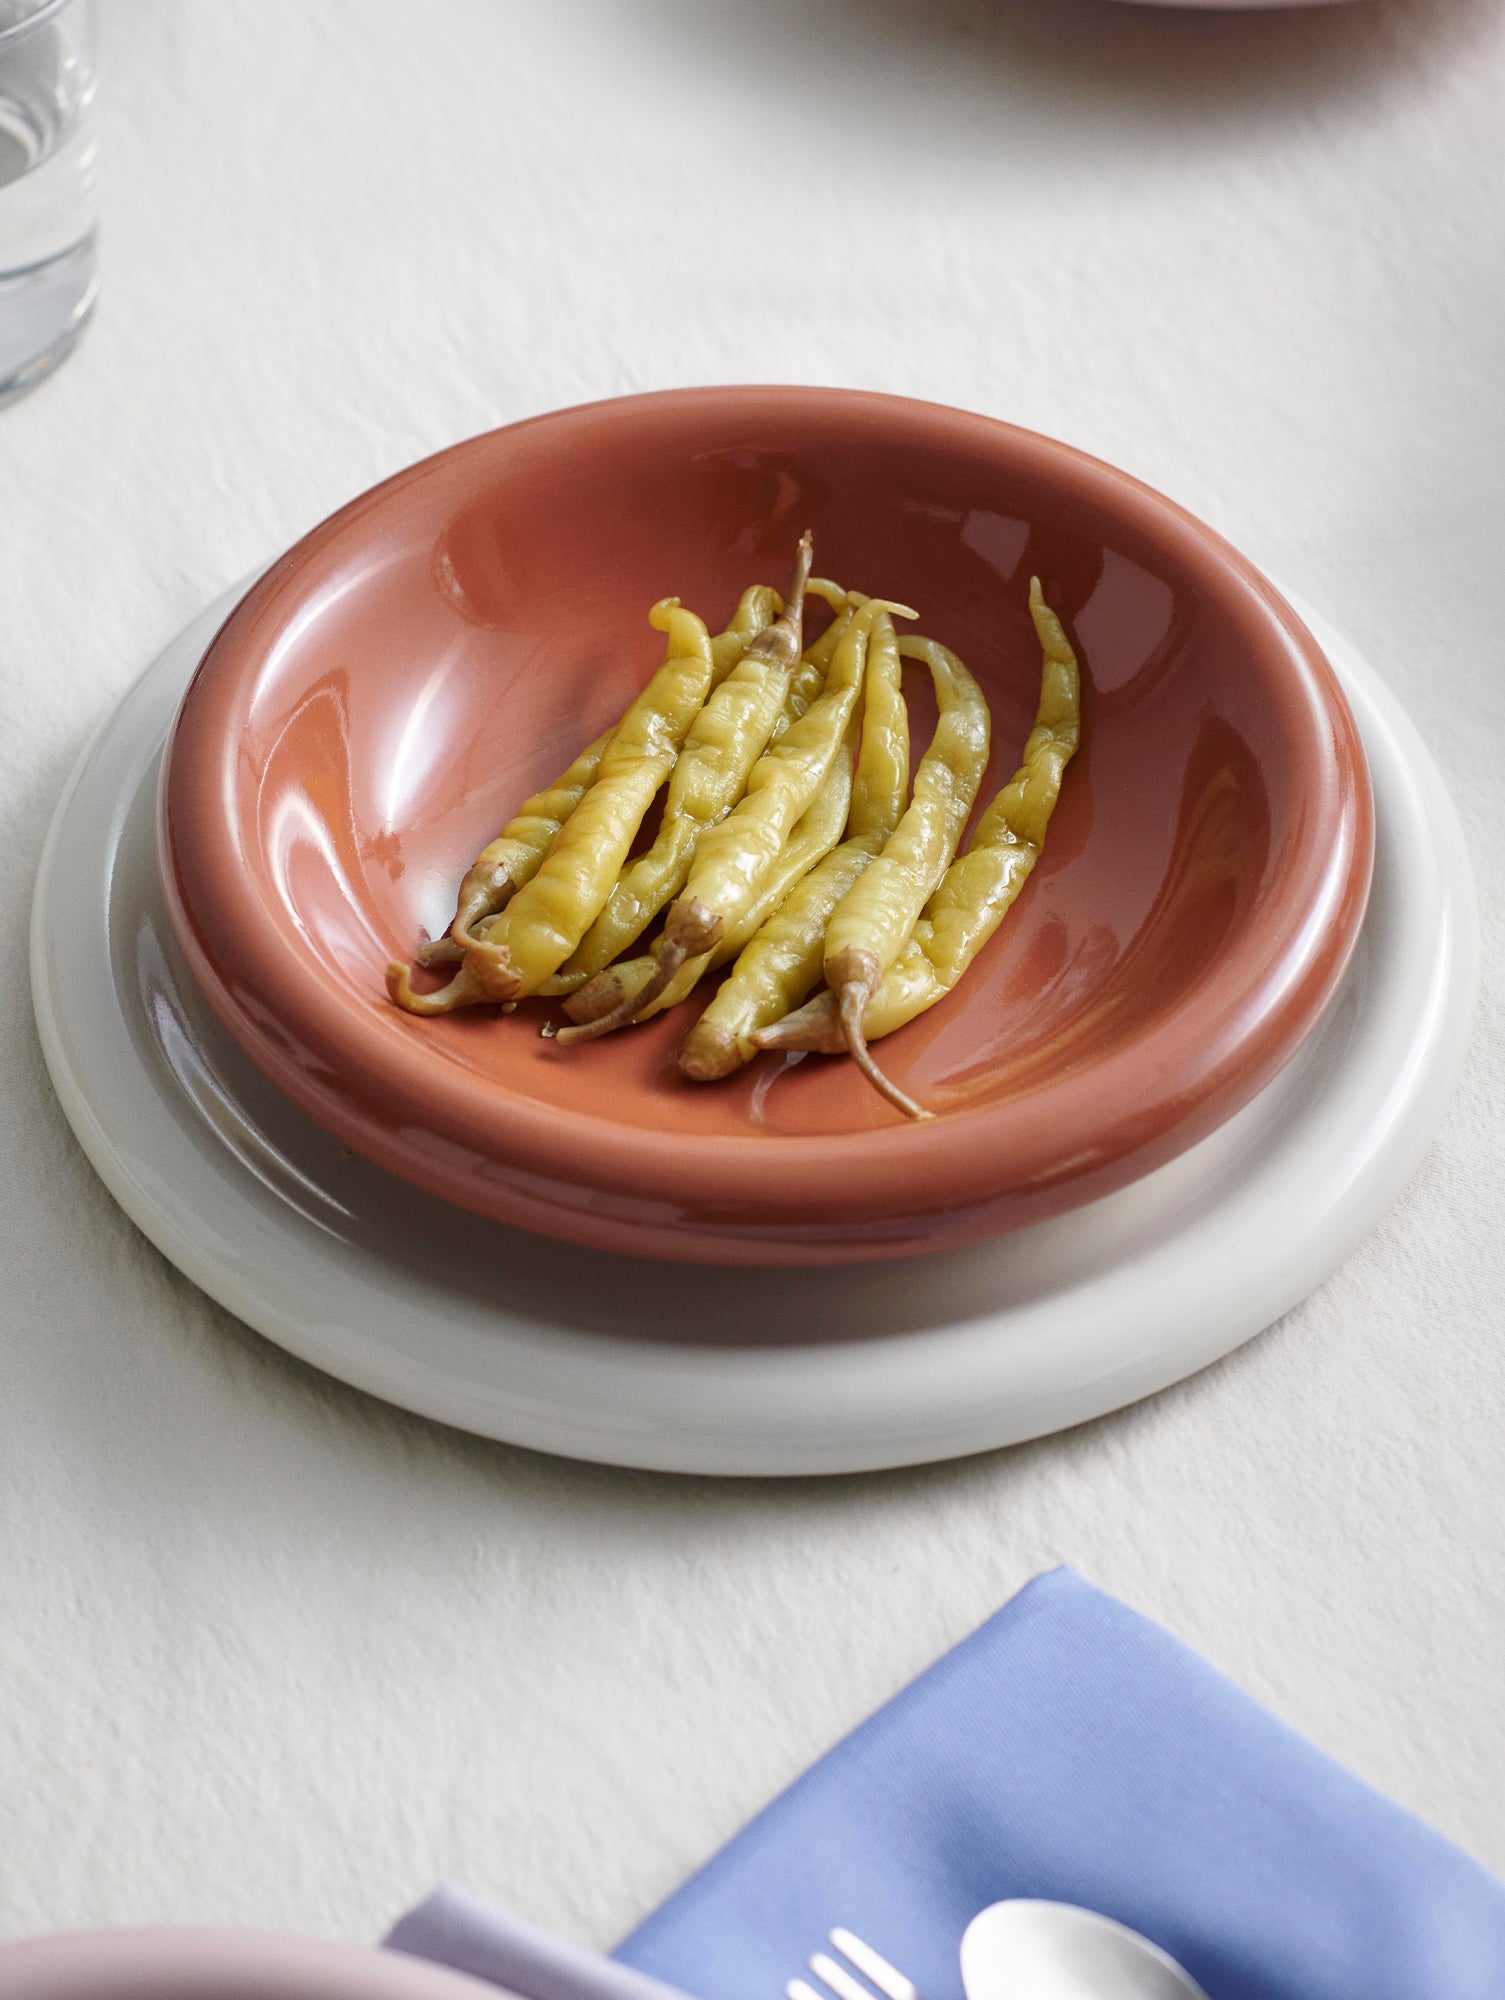 Barro Plate - Set of 2 by HAY - Off White